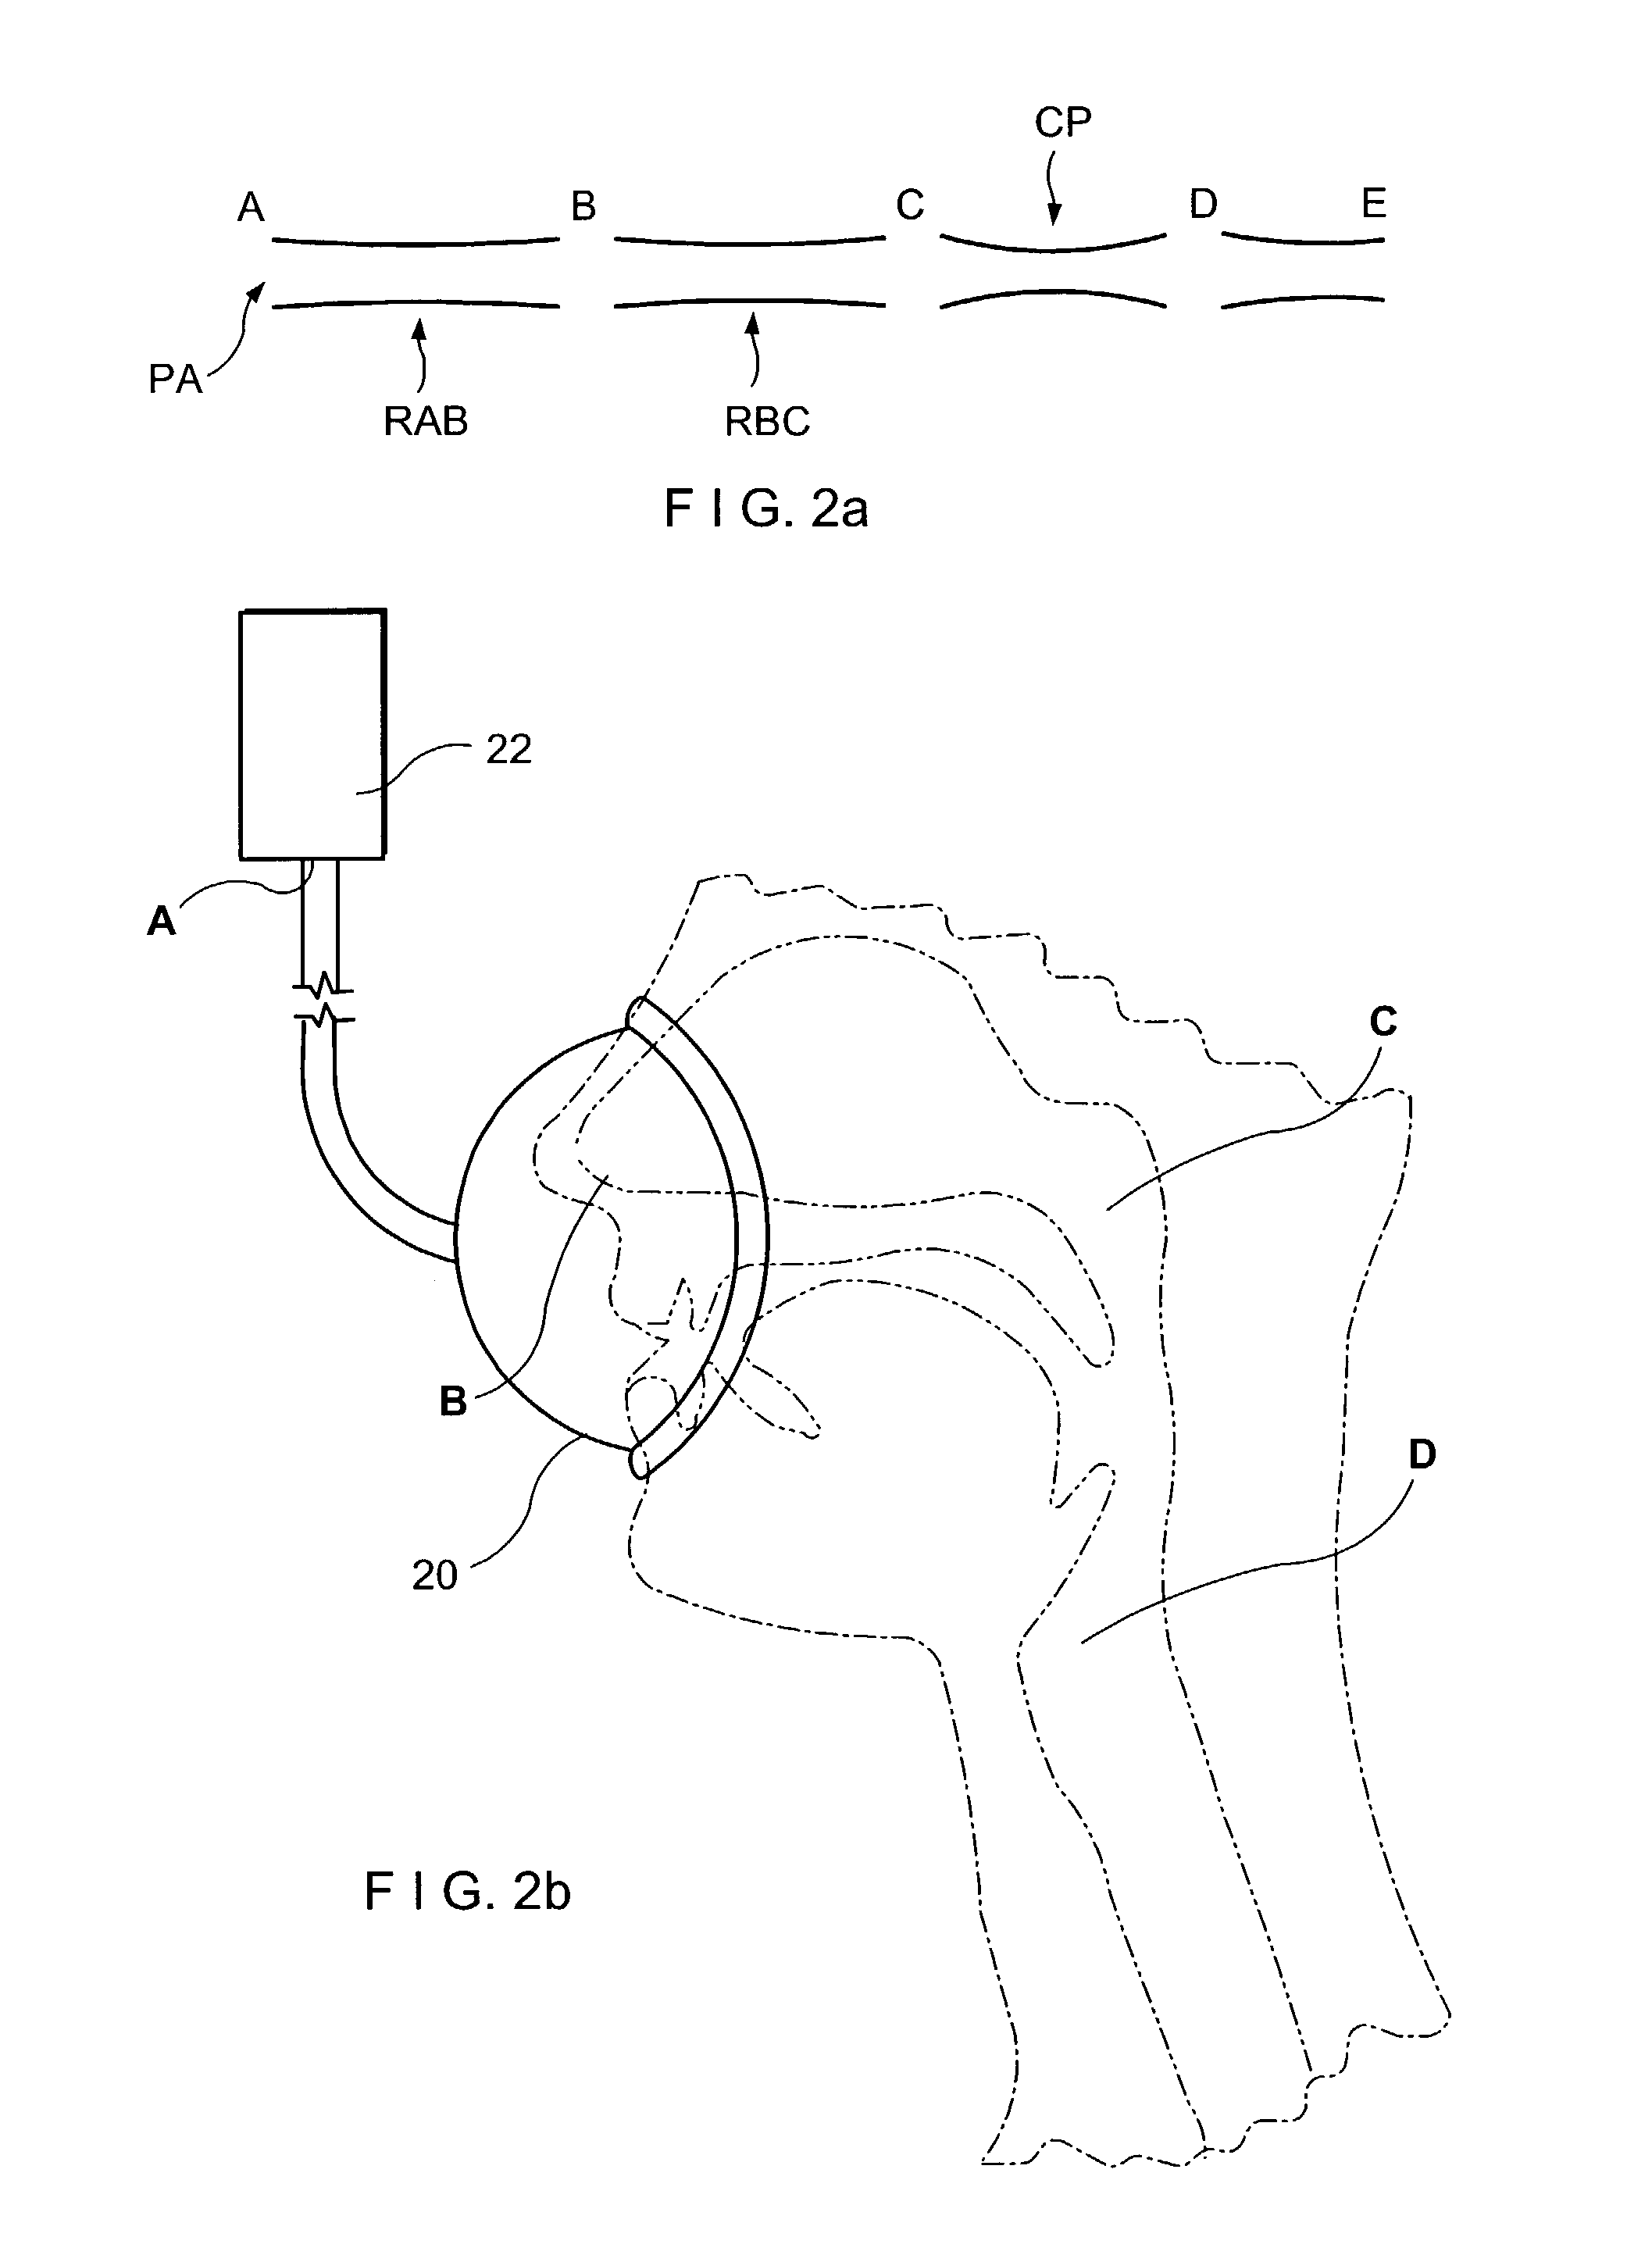 System and method for improved treatment of sleeping disorders using therapeutic positive airway pressure